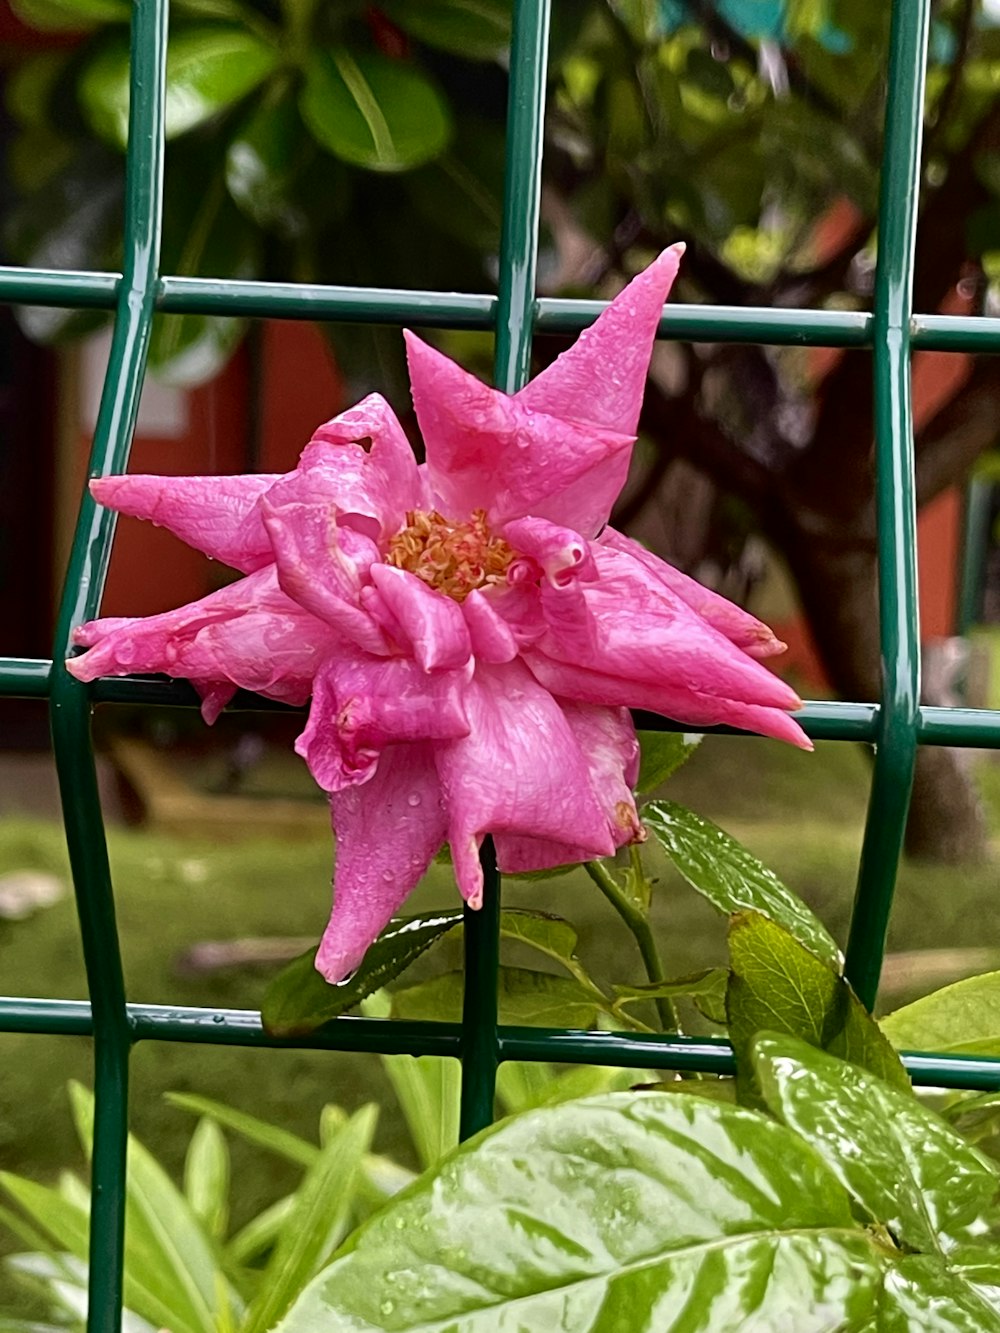 a pink flower in a pond